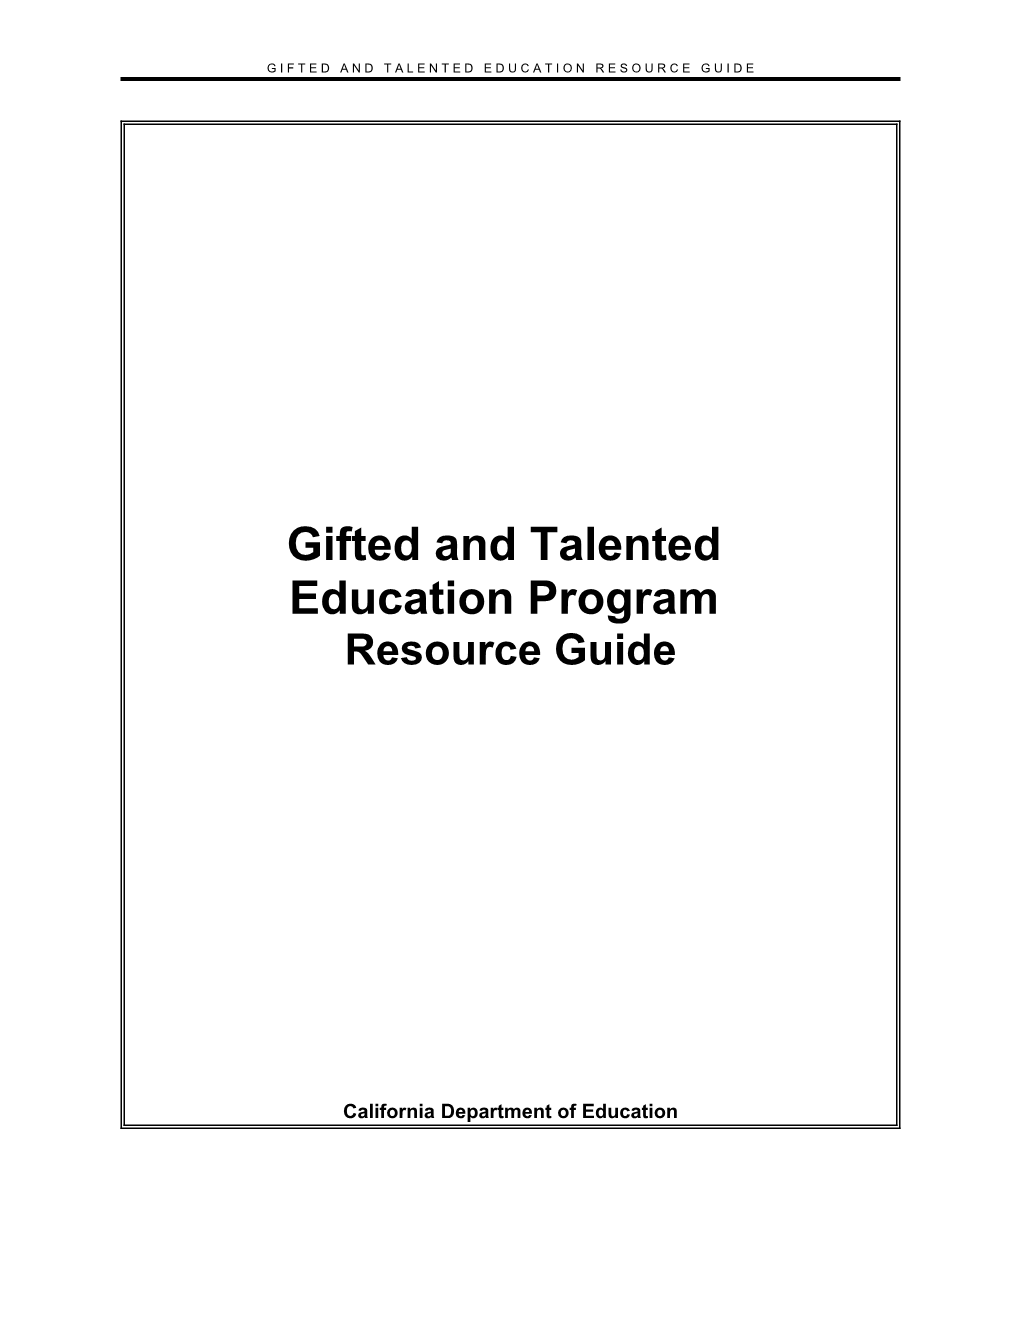 Resource Guide - Gifted & Talented Education (CA Dept of Education)